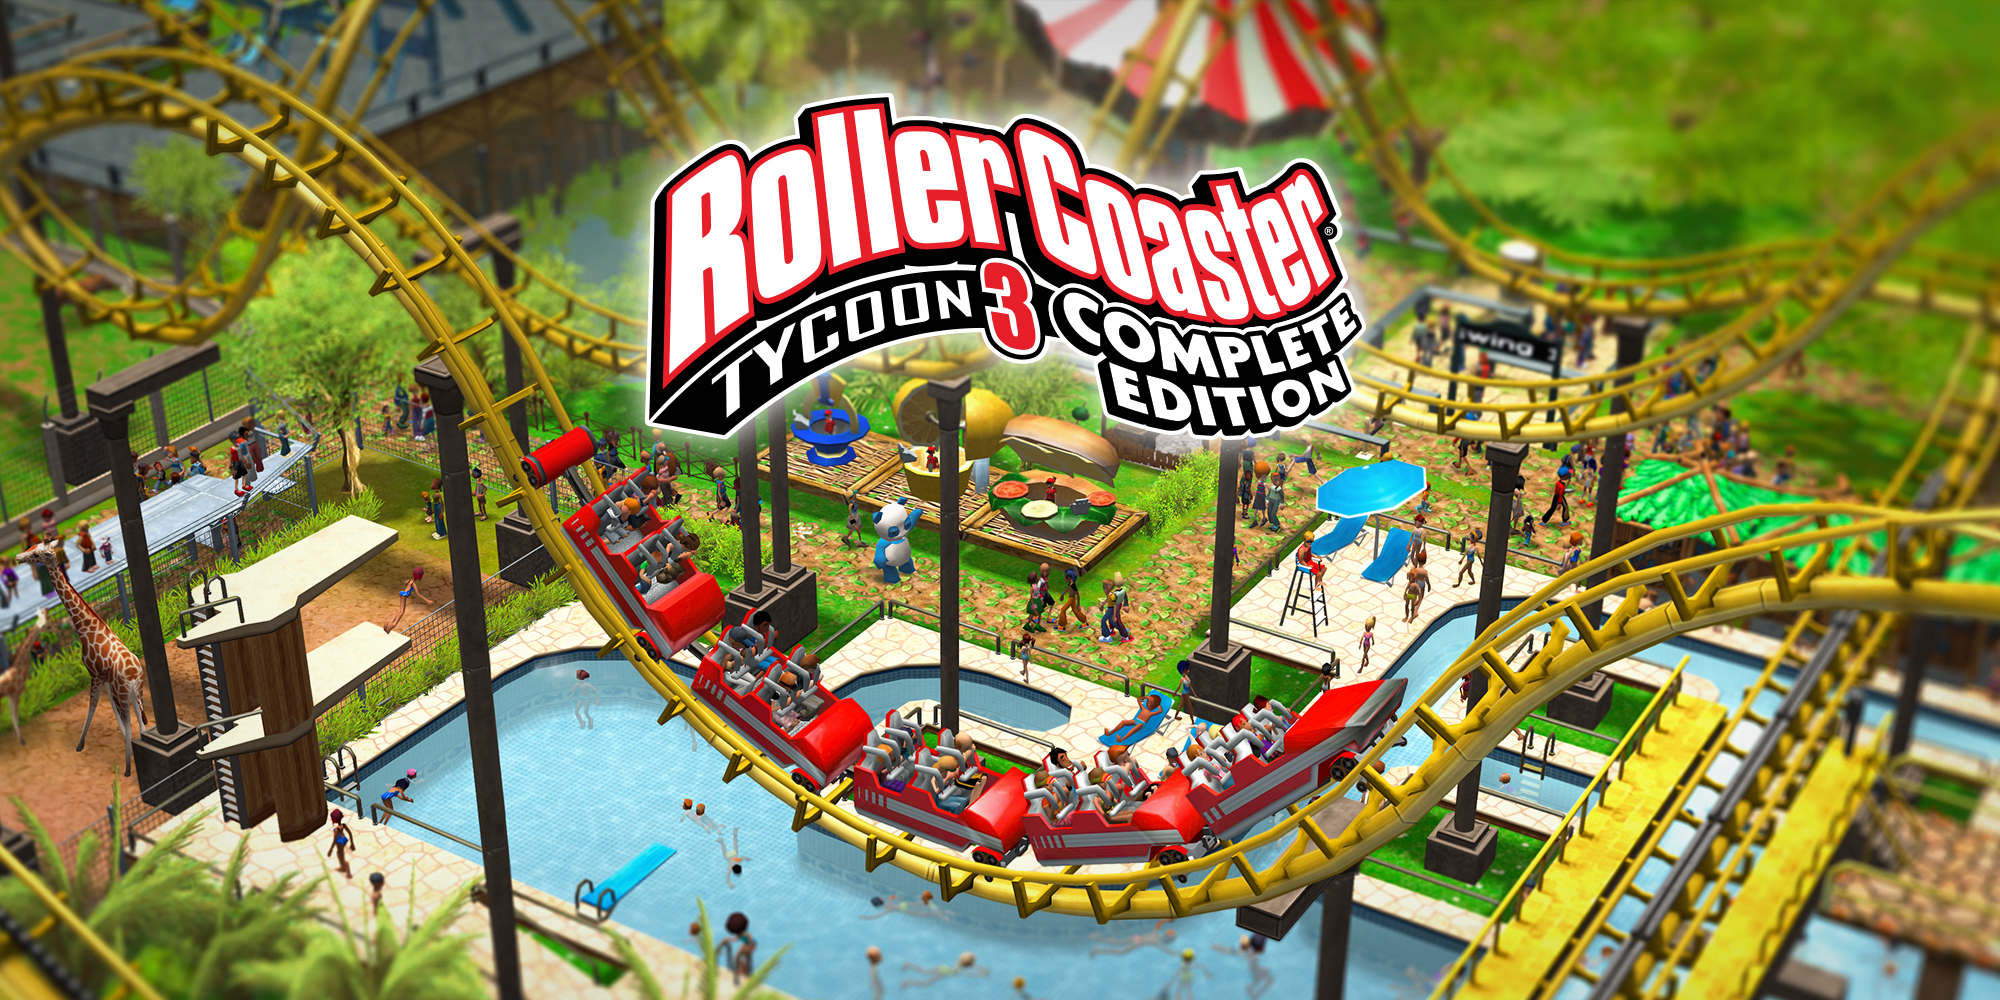 roller coaster 3 switch